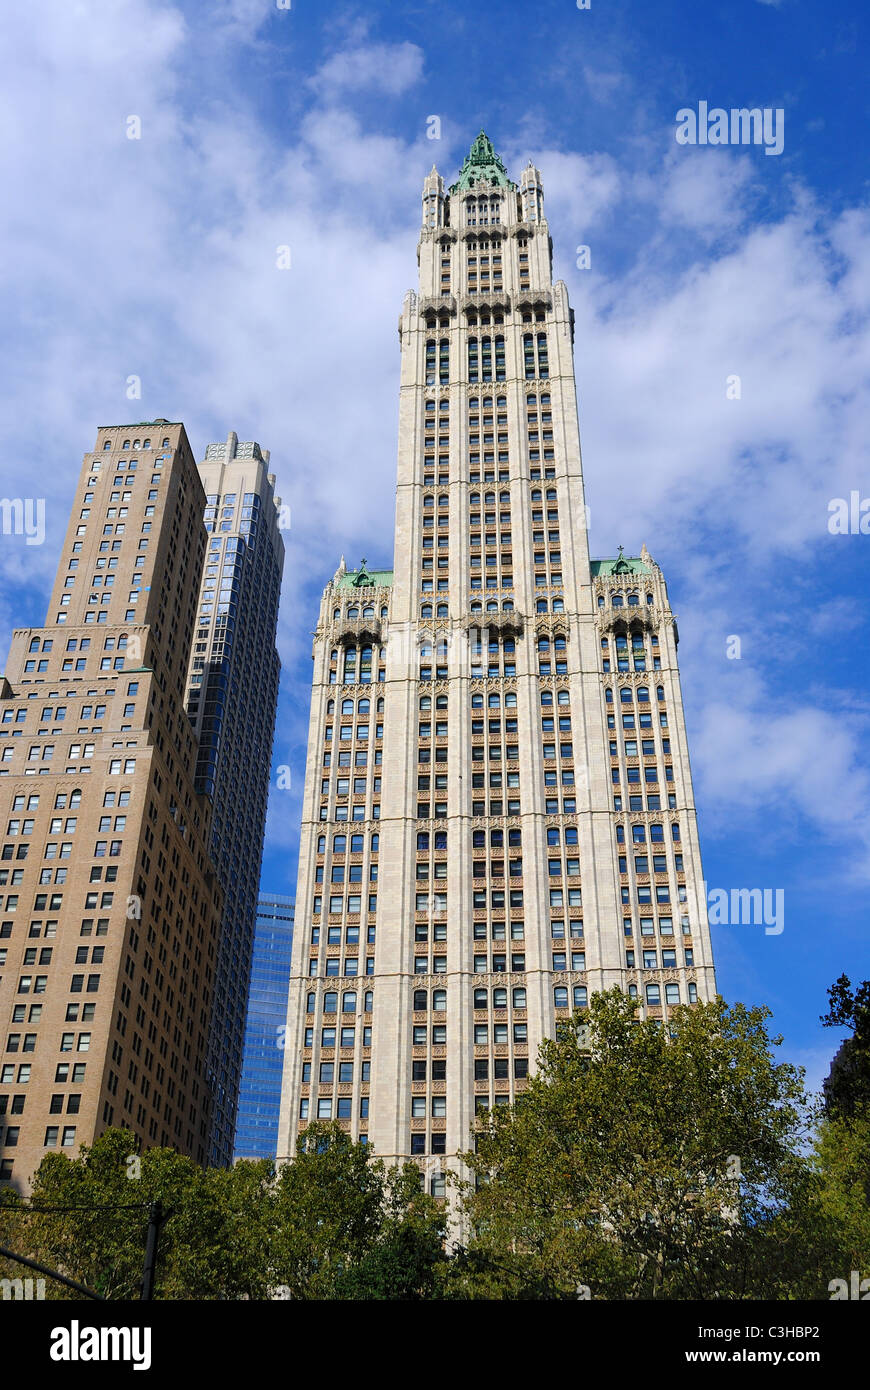 The historic Woolworth Building in New York, New York, USA. Stock Photo